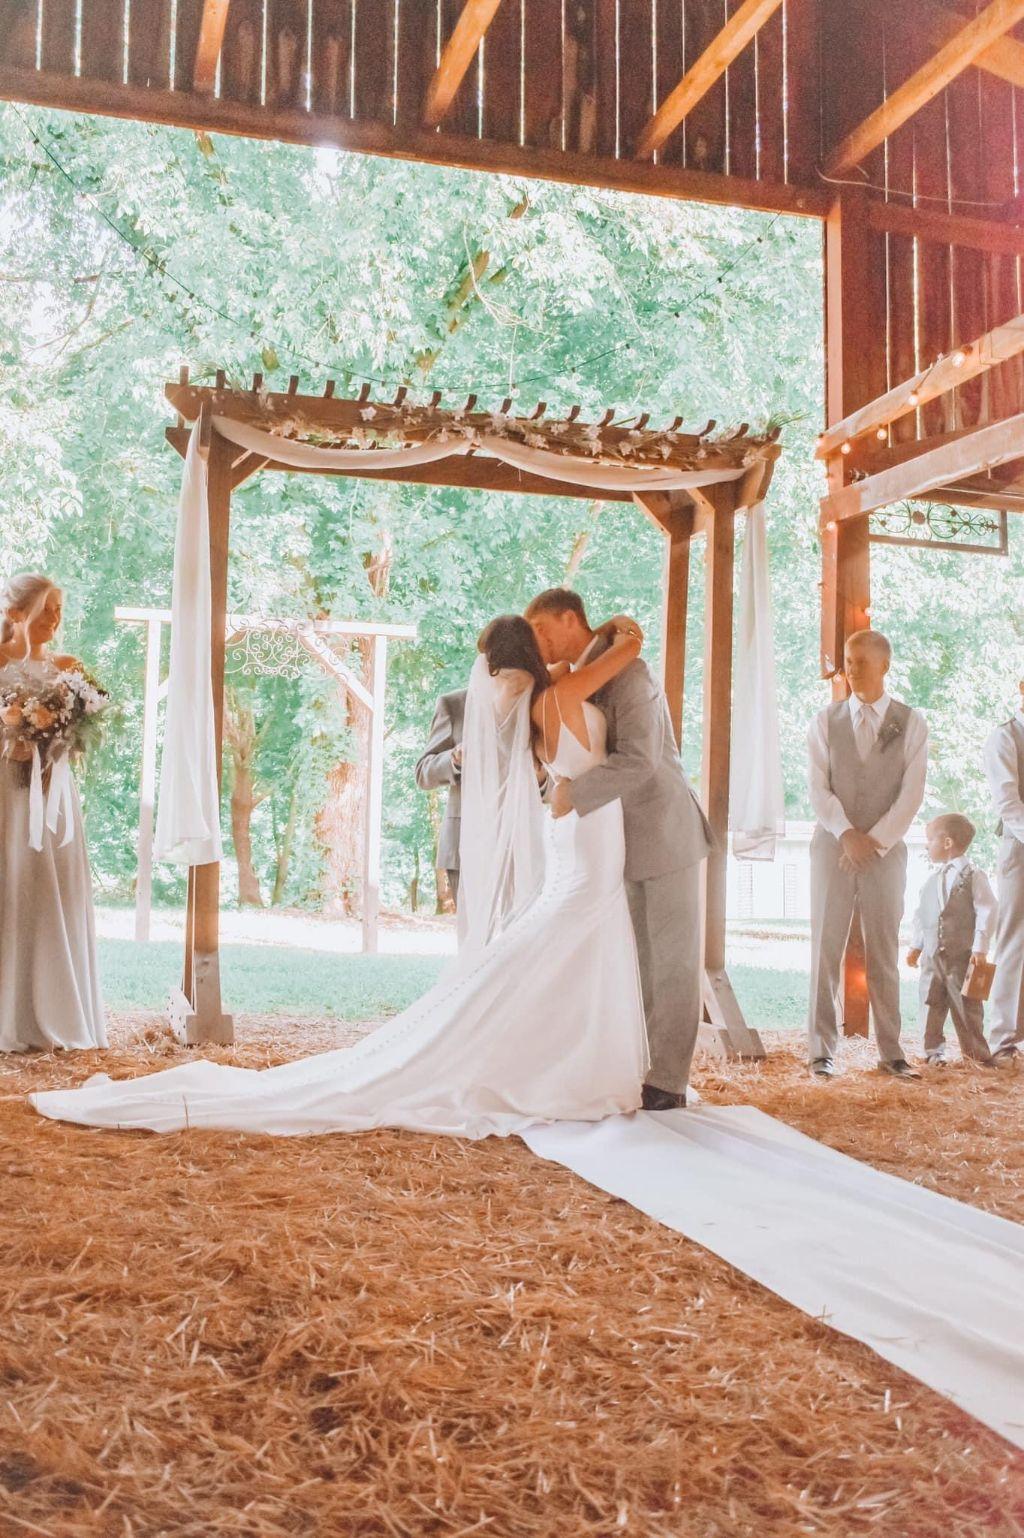 Burks wedding - photo of the kiss under the alter canopy of the barn with barn doors open to the woods